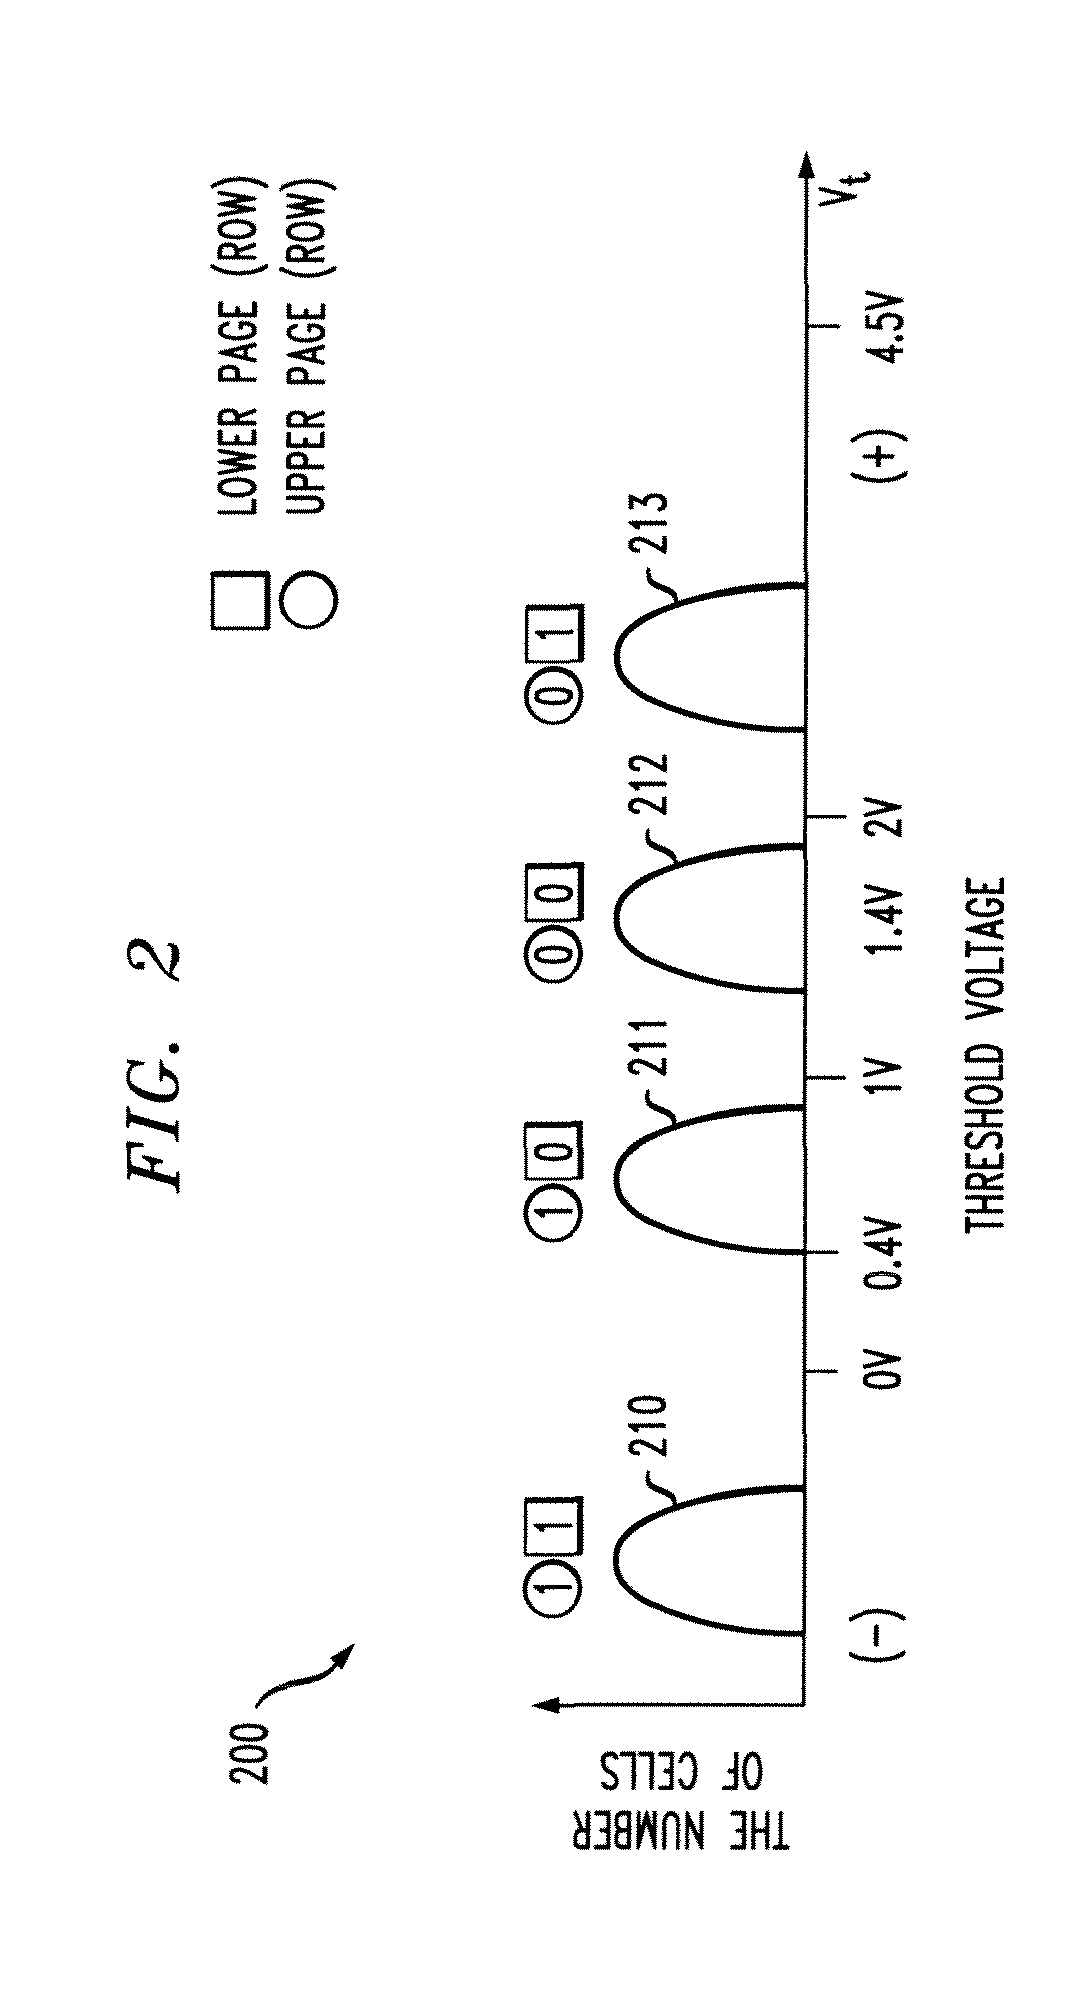 Methods and apparatus for approximating a probability density function or distribution for a received value in communication or storage systems